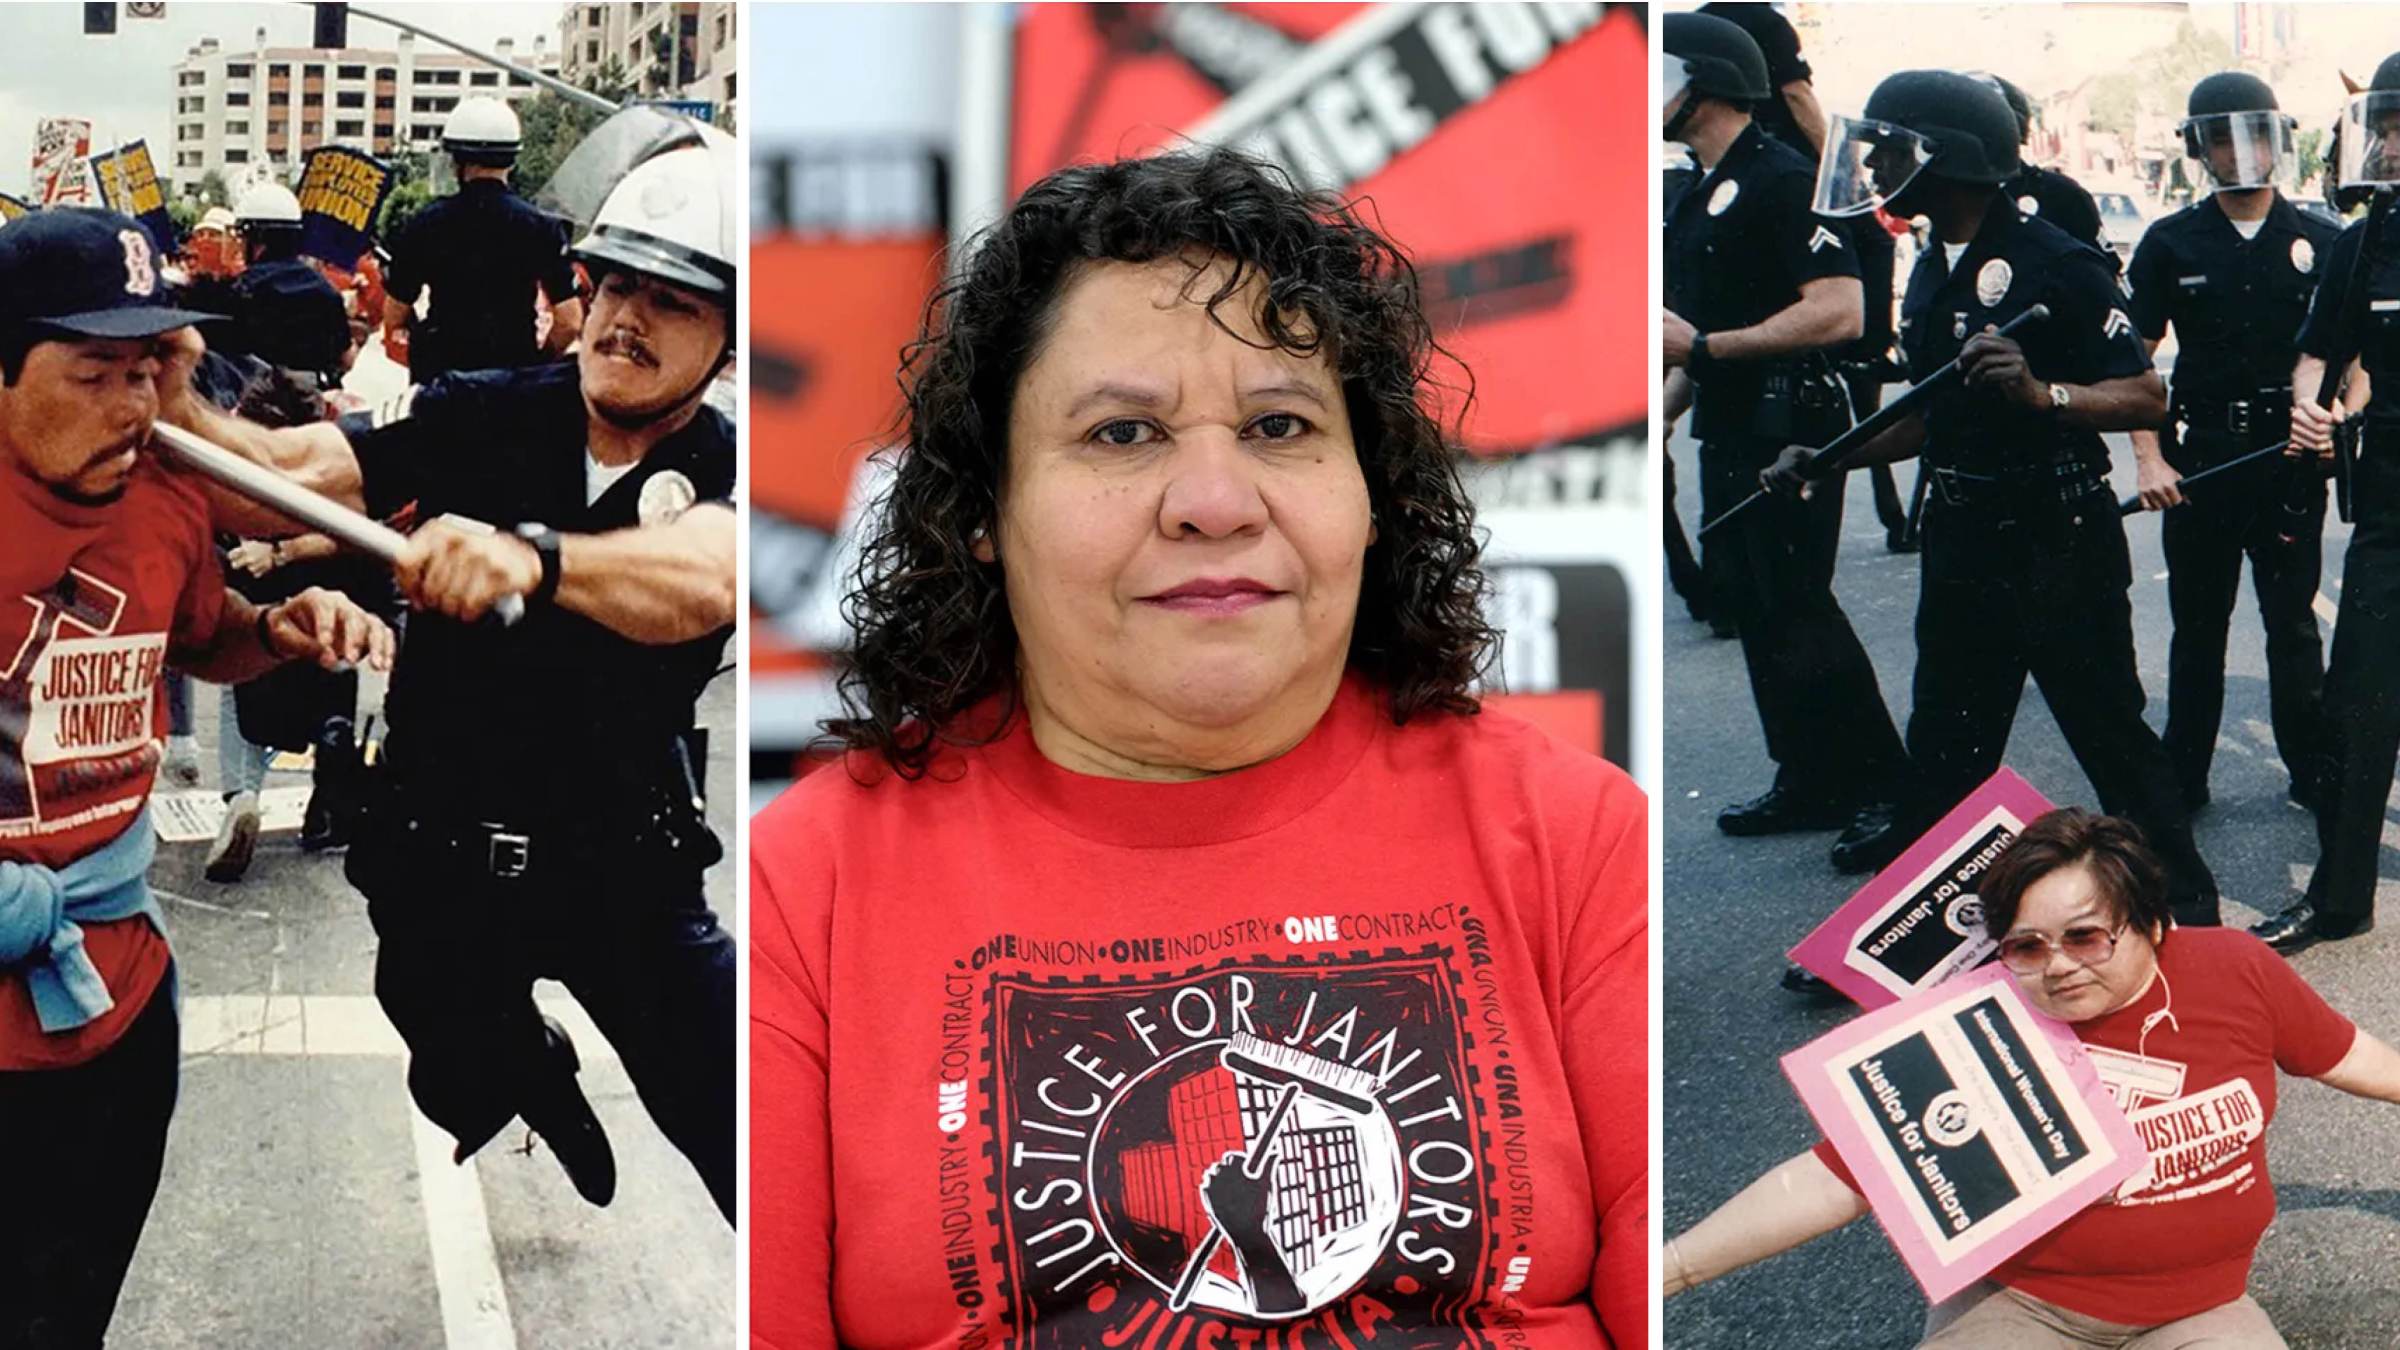 Three side-by-side images. Two on the outside edge show police confronting Justice for Janitors protesters. The middle photo is a portrait of a Latino woman.